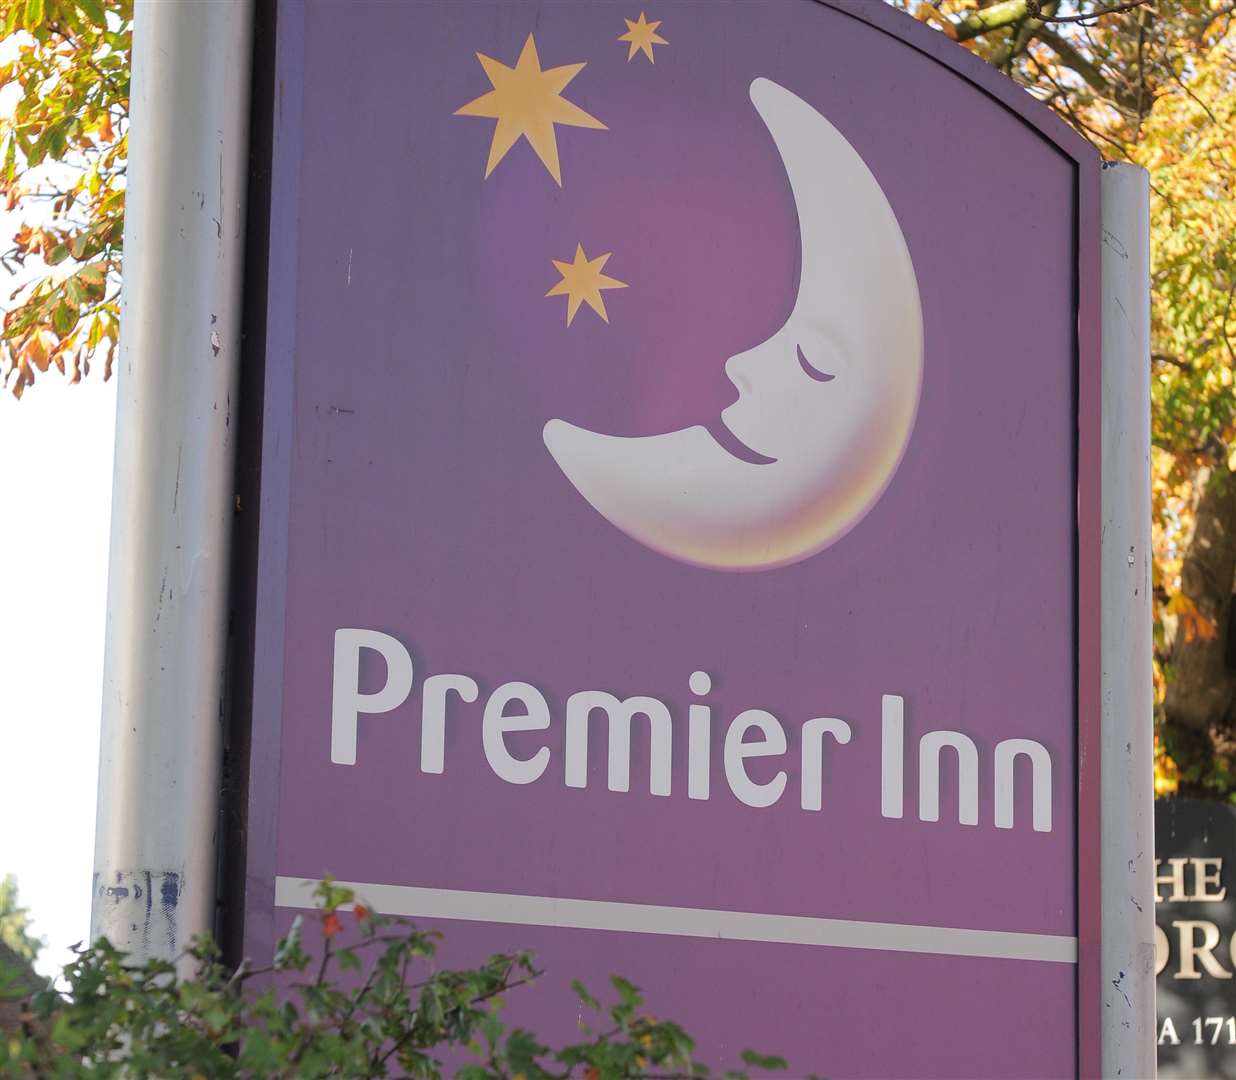 Premier Inn is welcoming families back to its hotels with a £29 deal